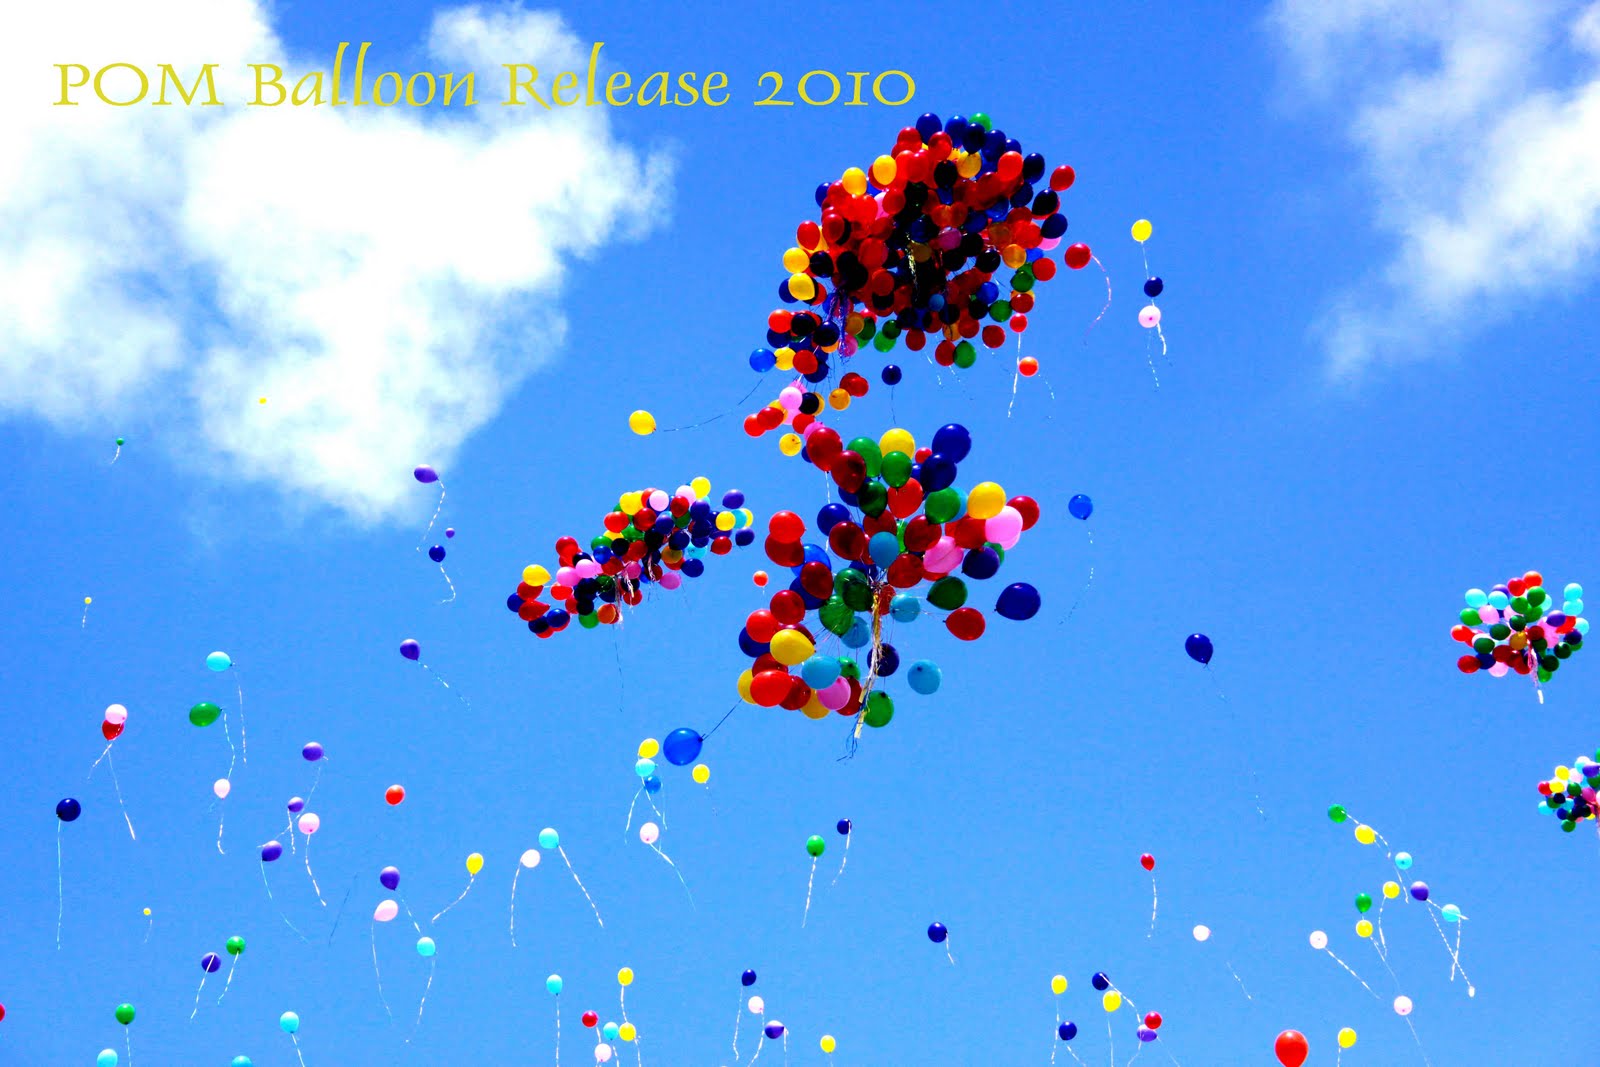 MOMENTS THAT LAST POM Balloon Release 2010